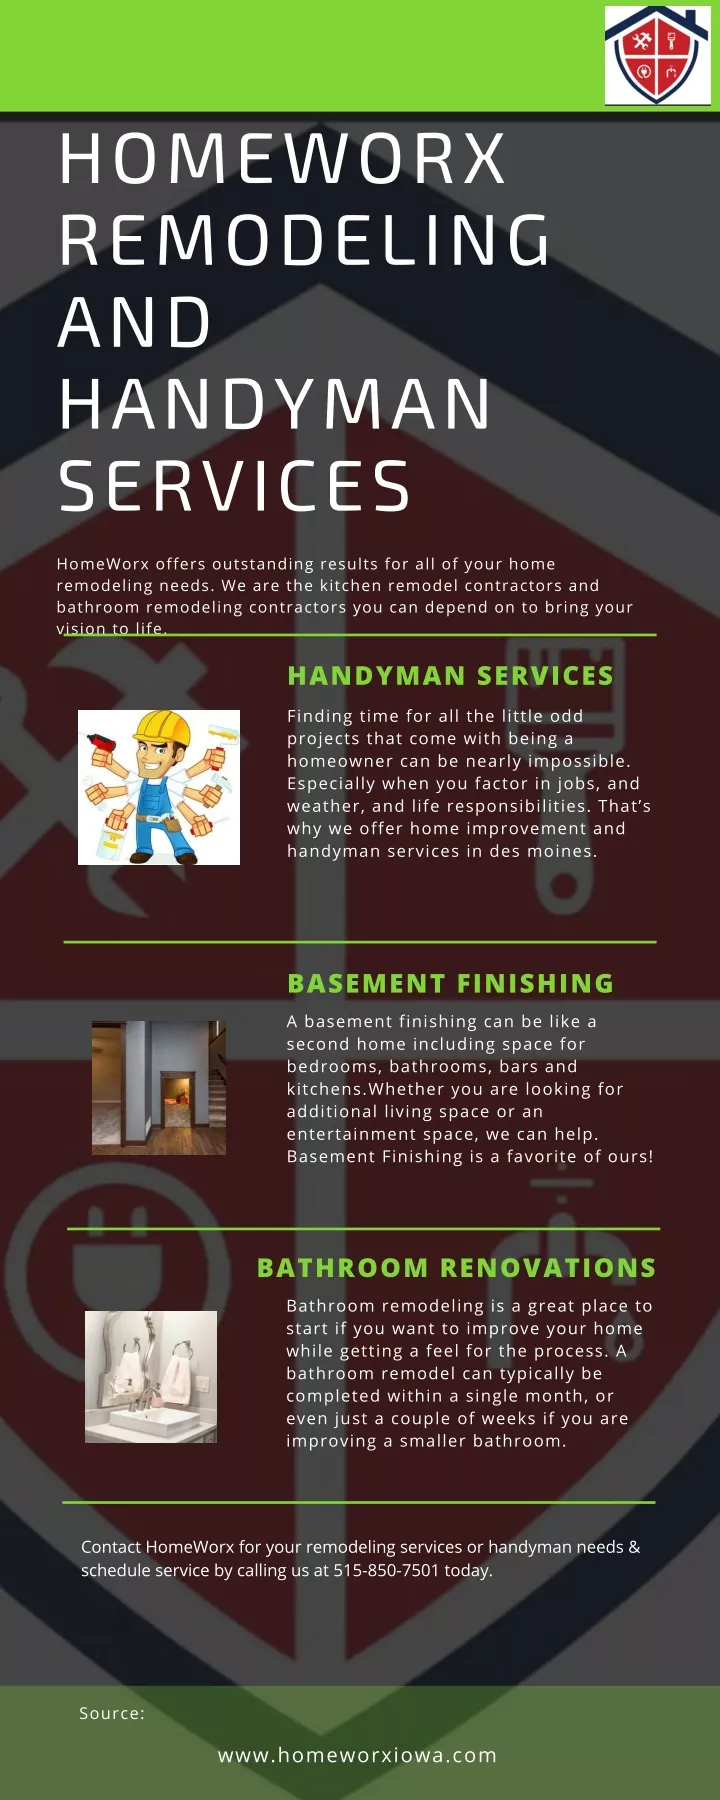 homeworx remodeling and handyman services